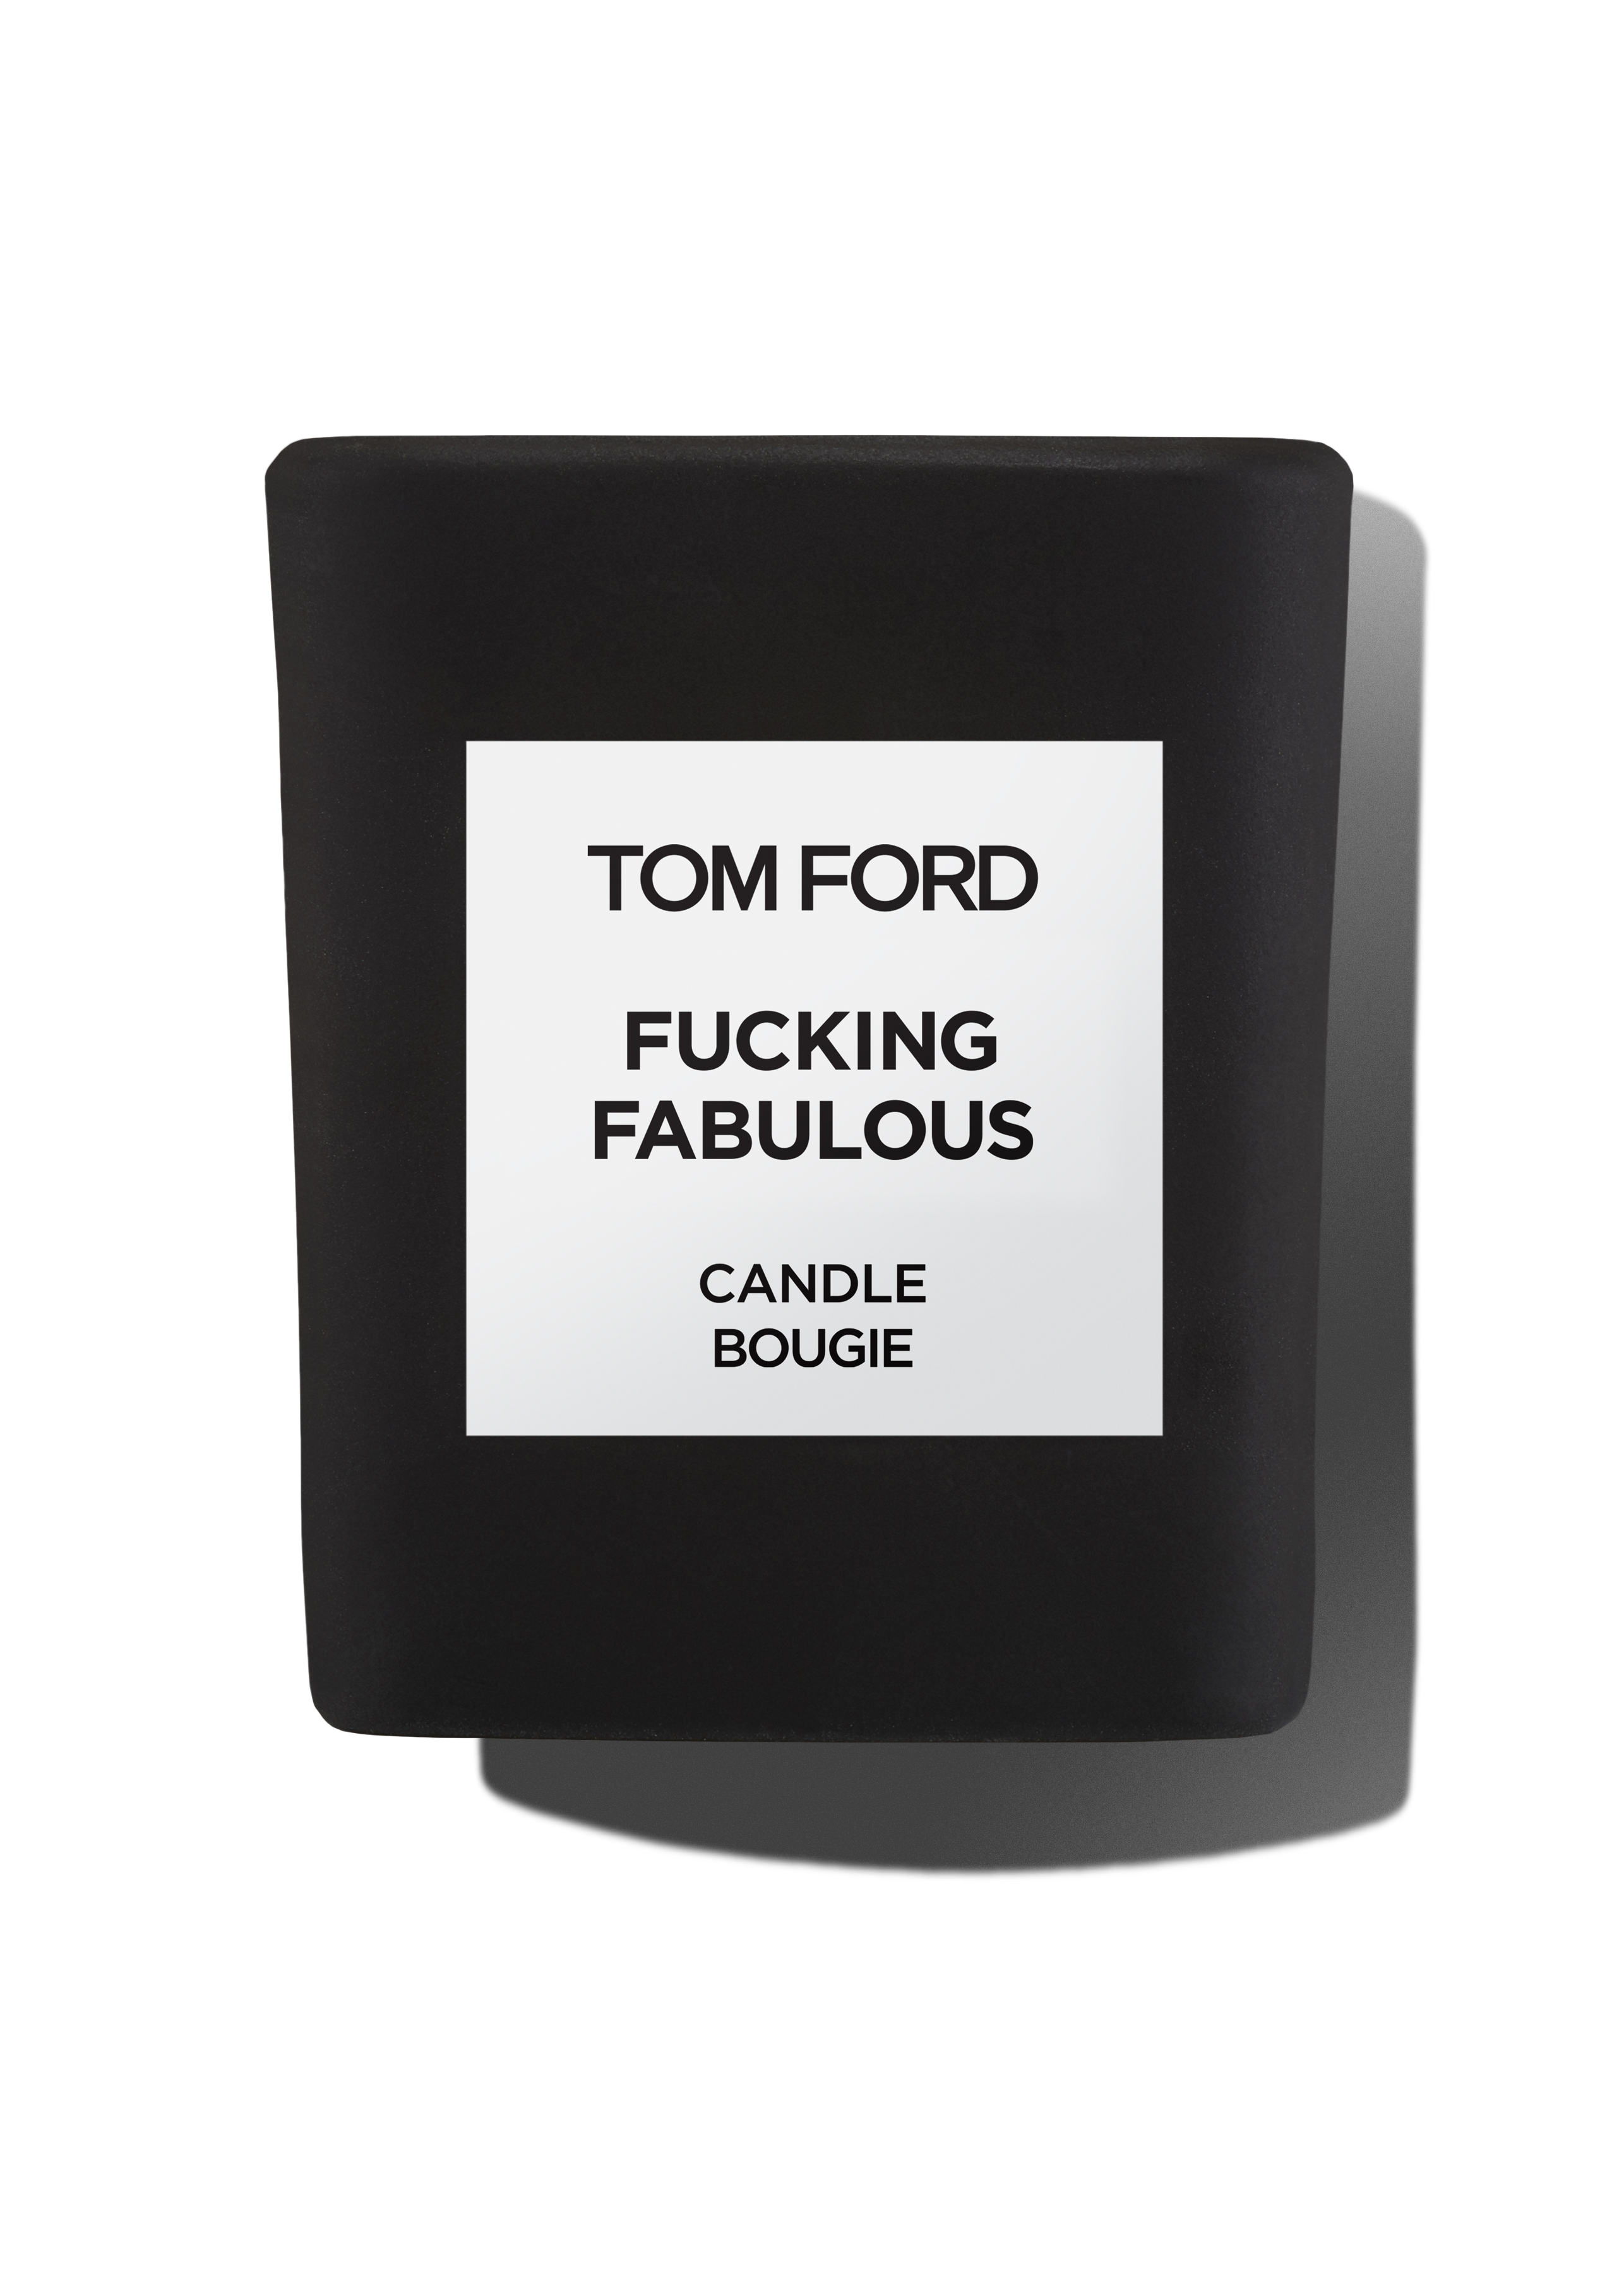 Candles Fragrance Beauty Tomford Com